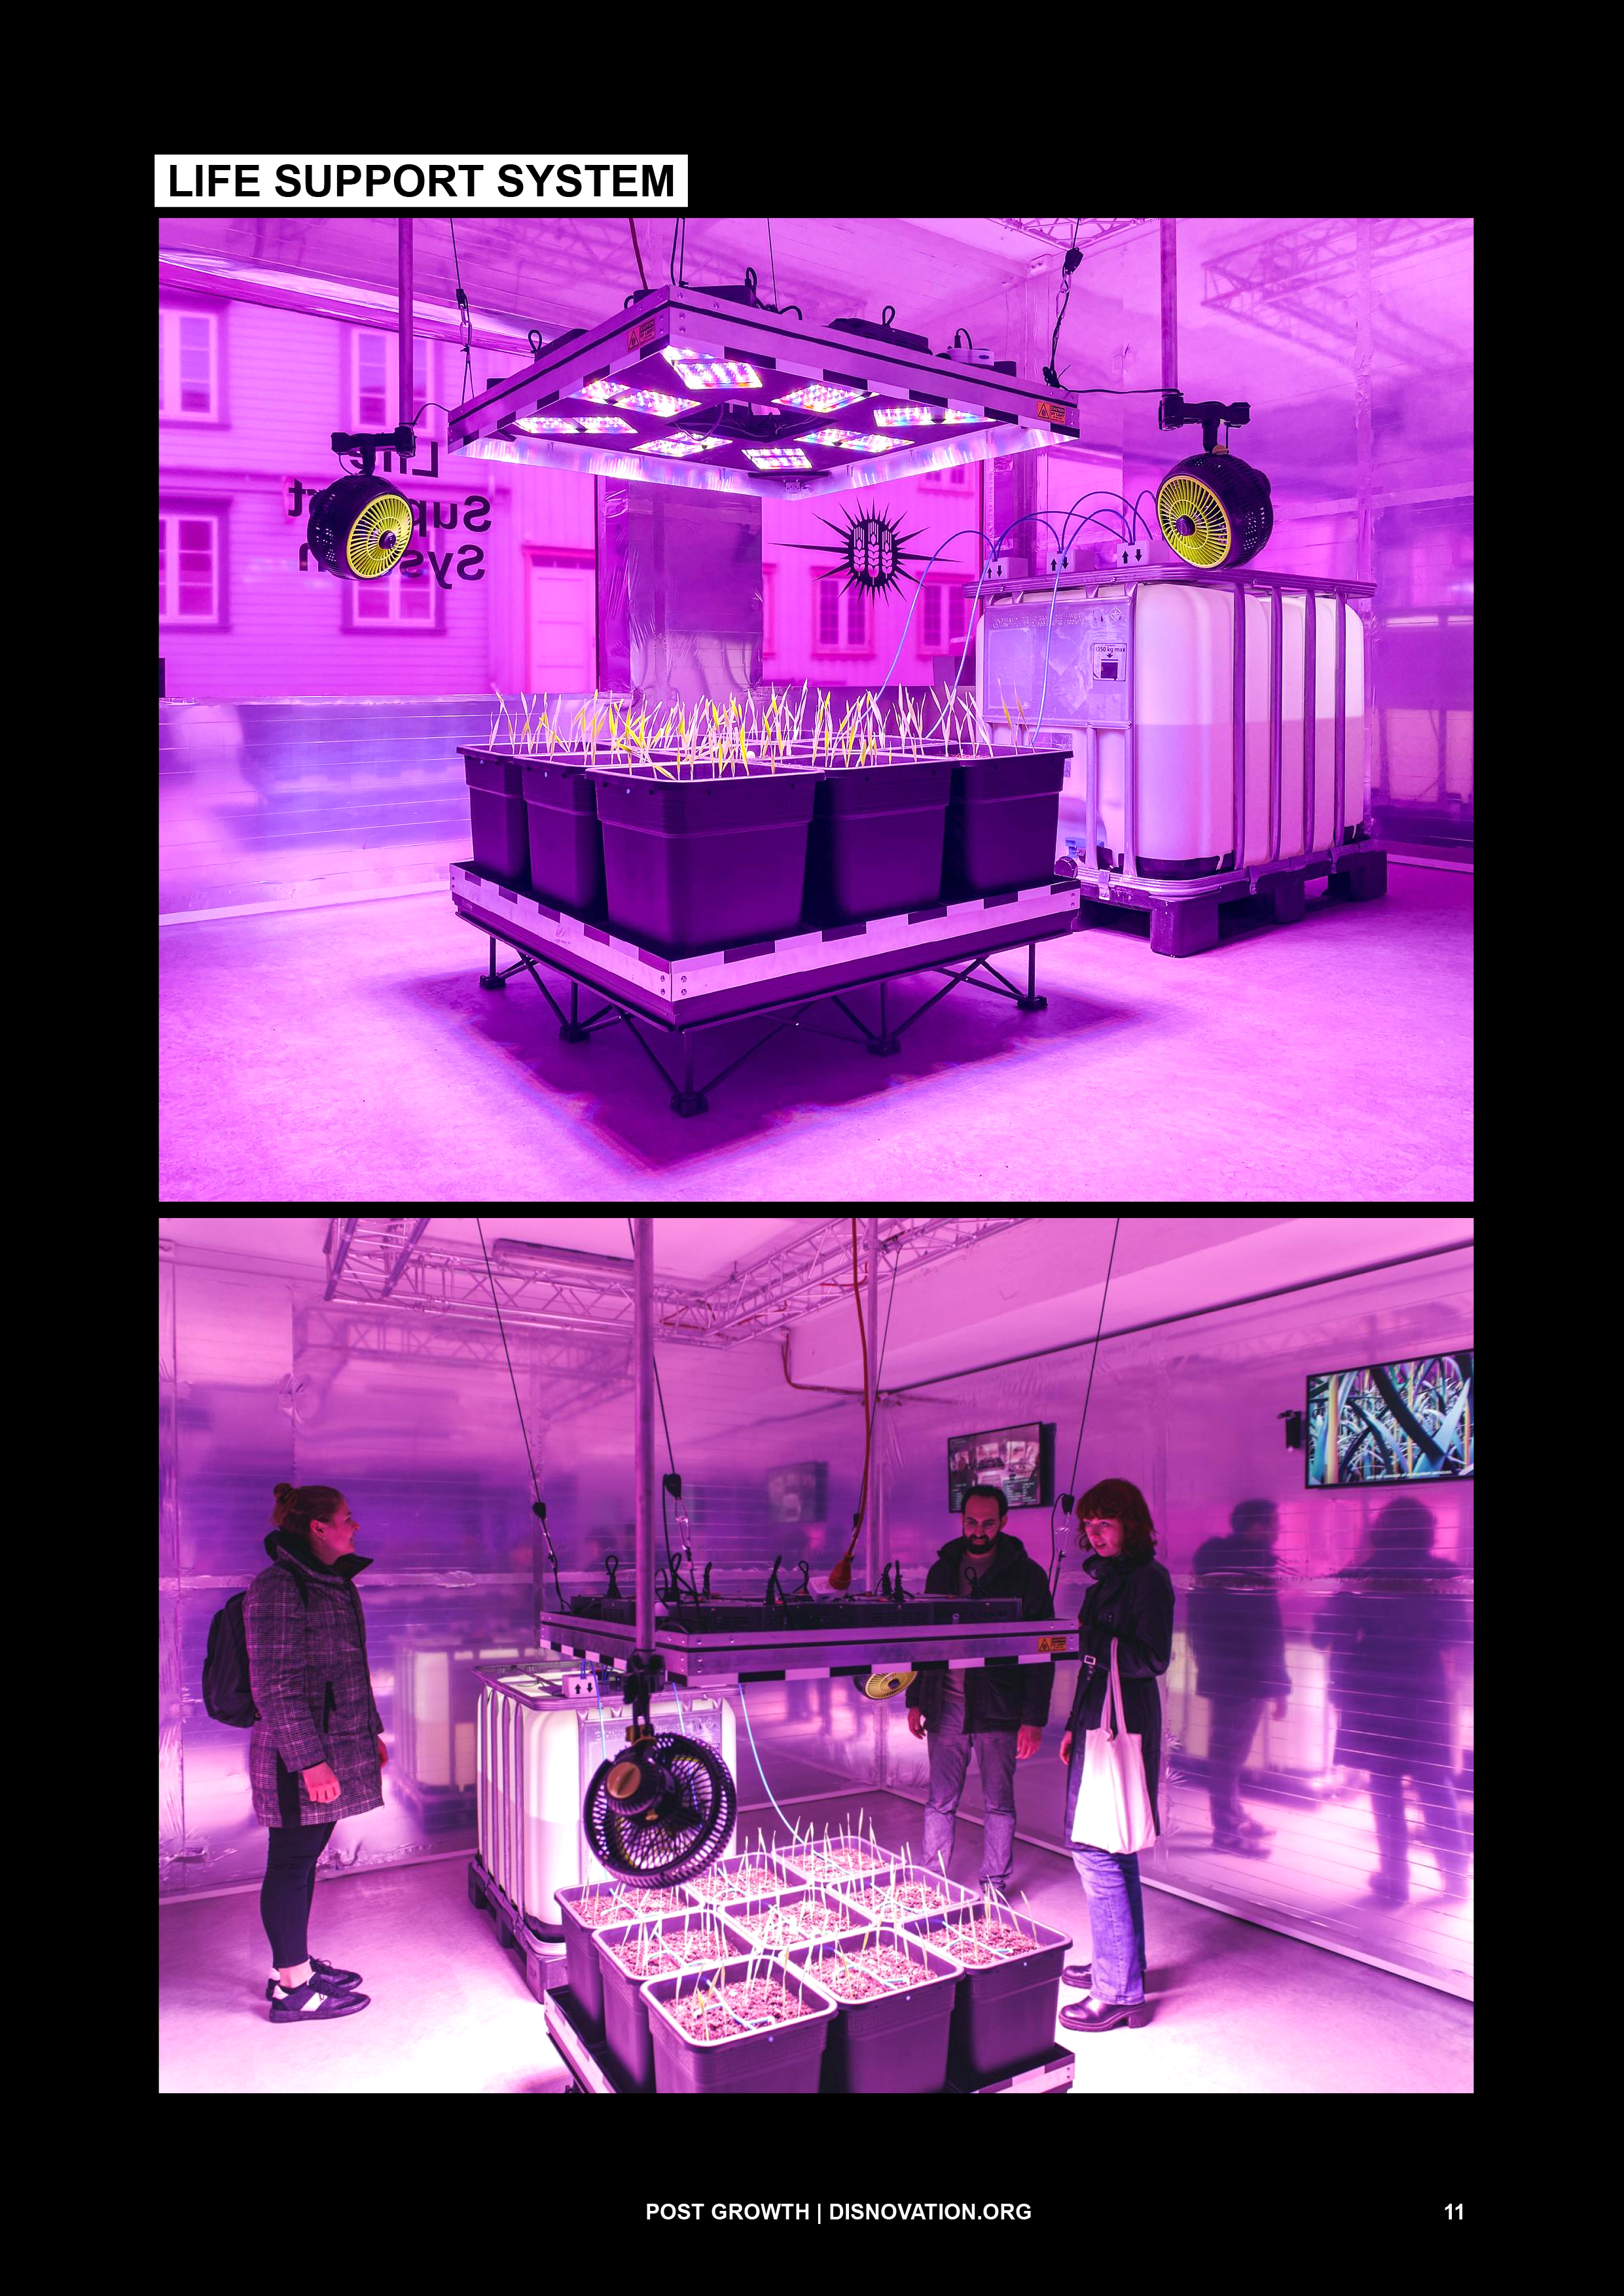 Life support system / Ecosystem services estimation experiment  installation, 1m2 of automated cultivation, led grow lights, camera, streaming | 2020